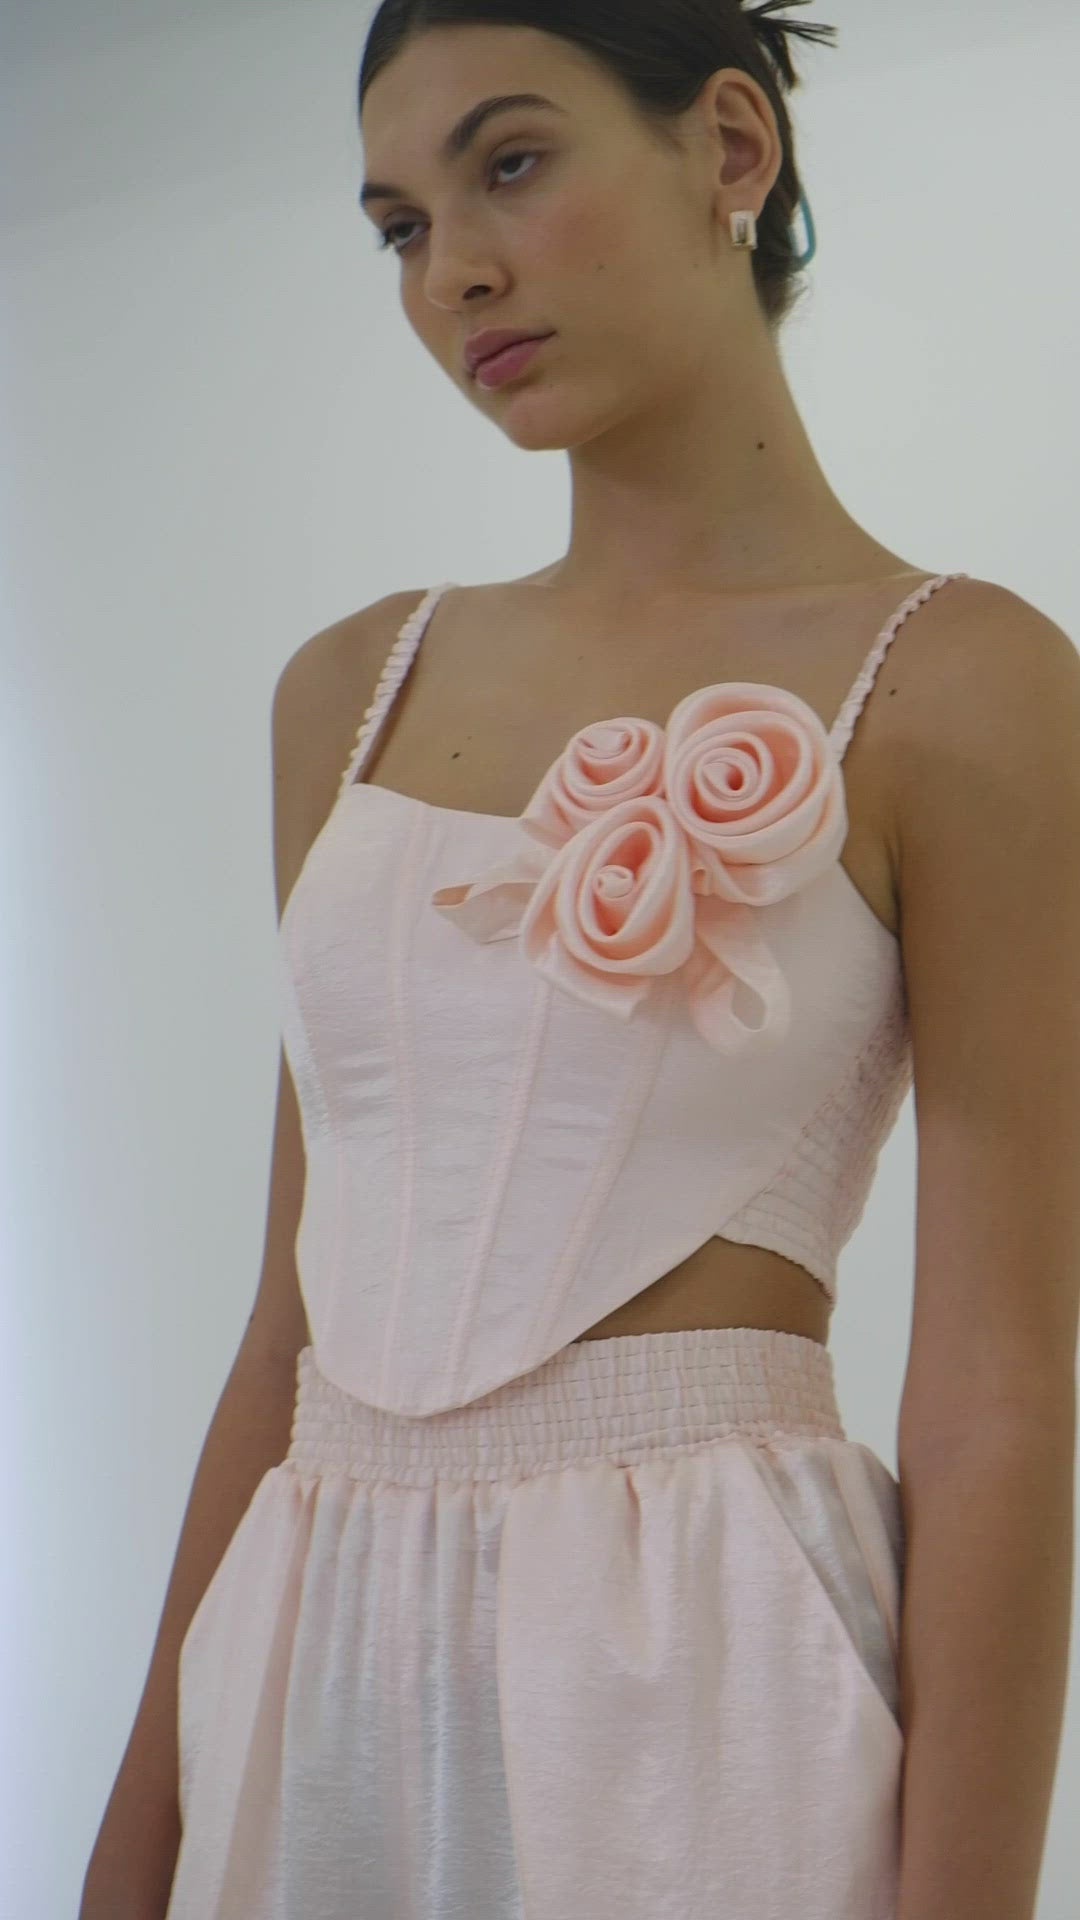 Peachy cropped corset top